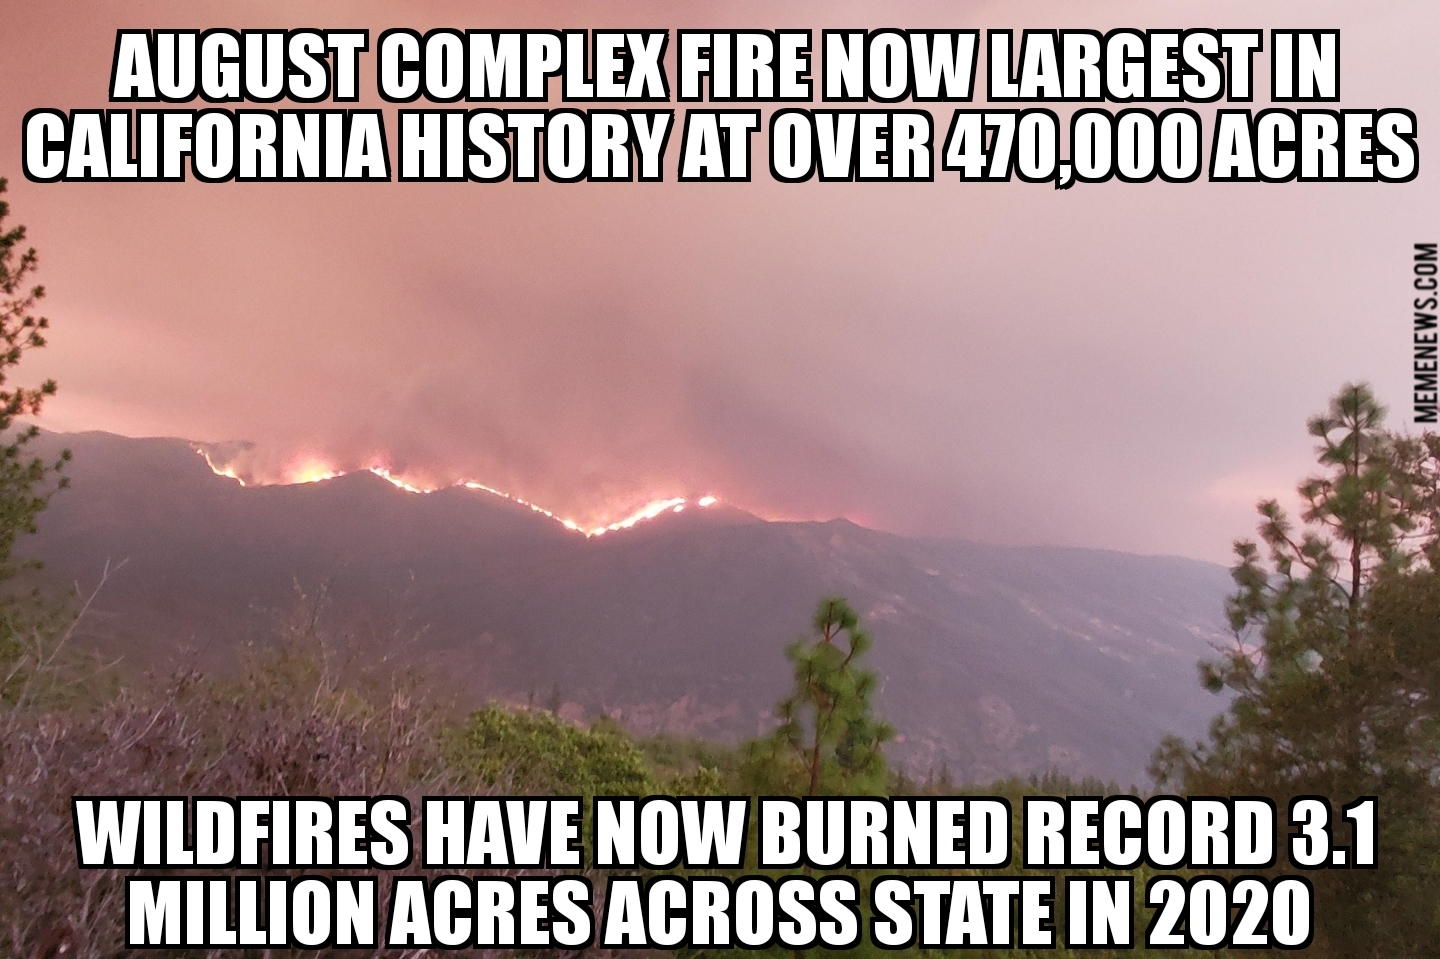 August Complex Fire largest in California history